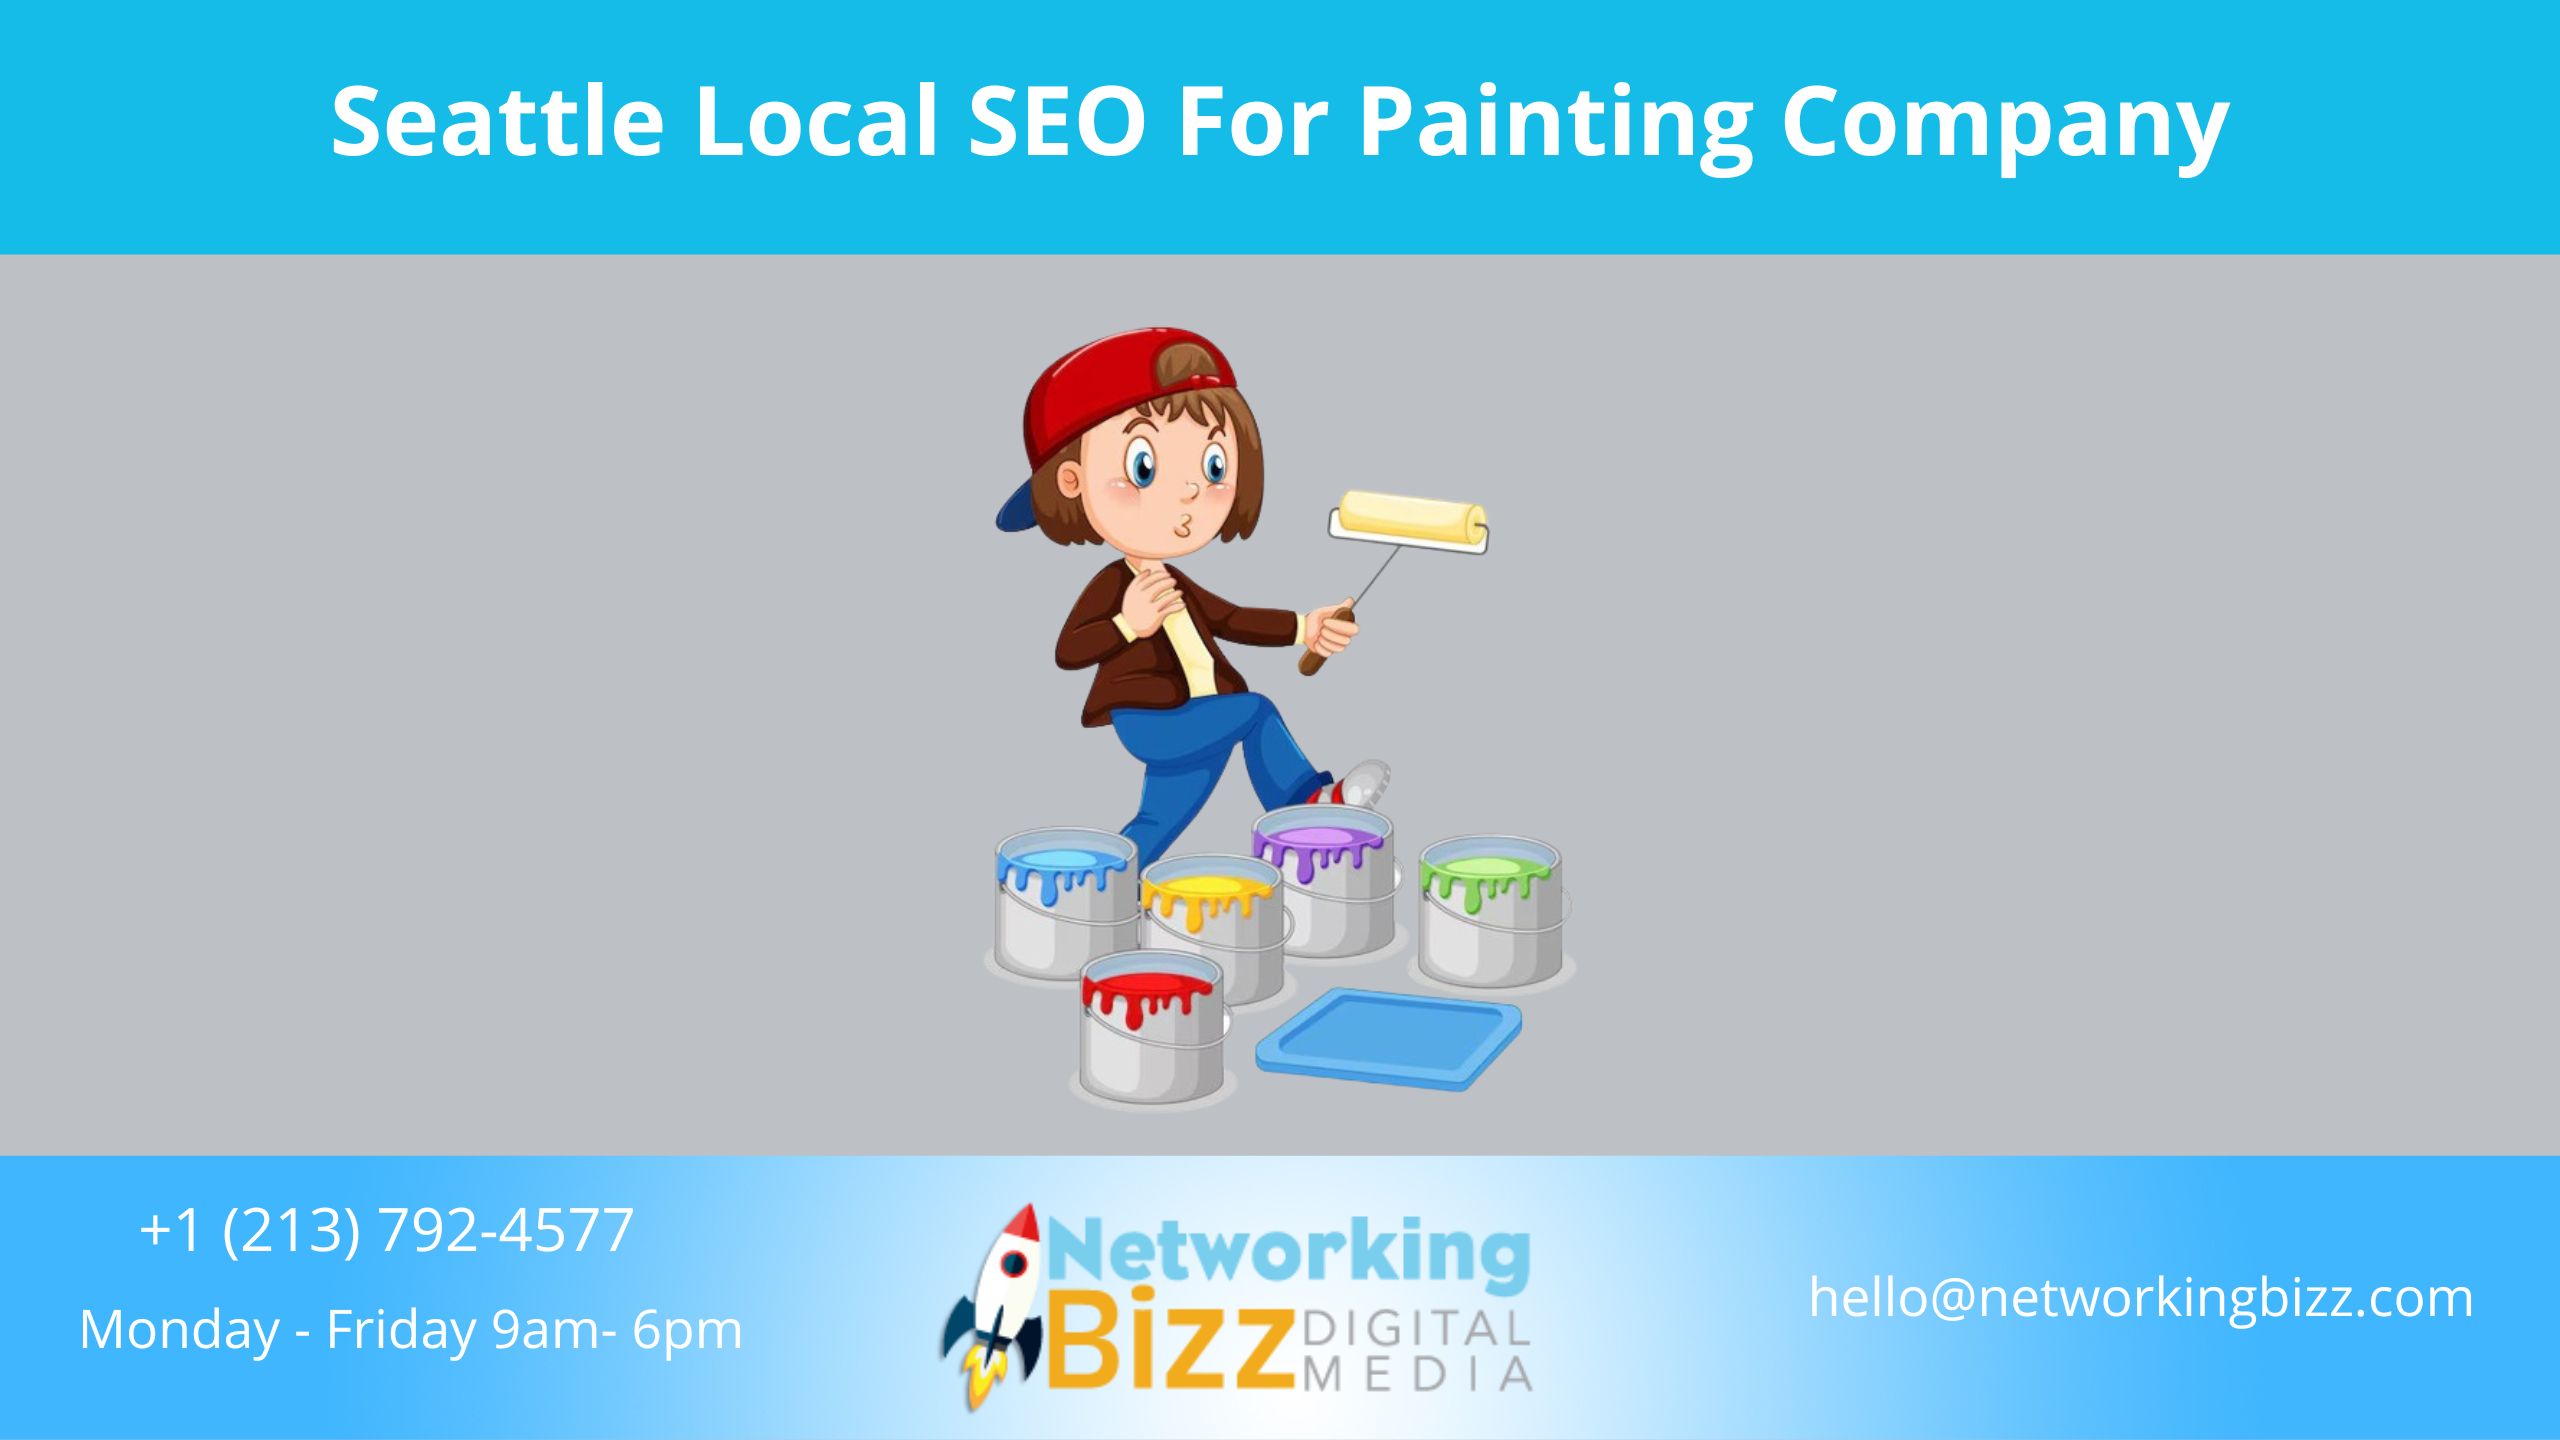 Seattle Local SEO For Painting Company